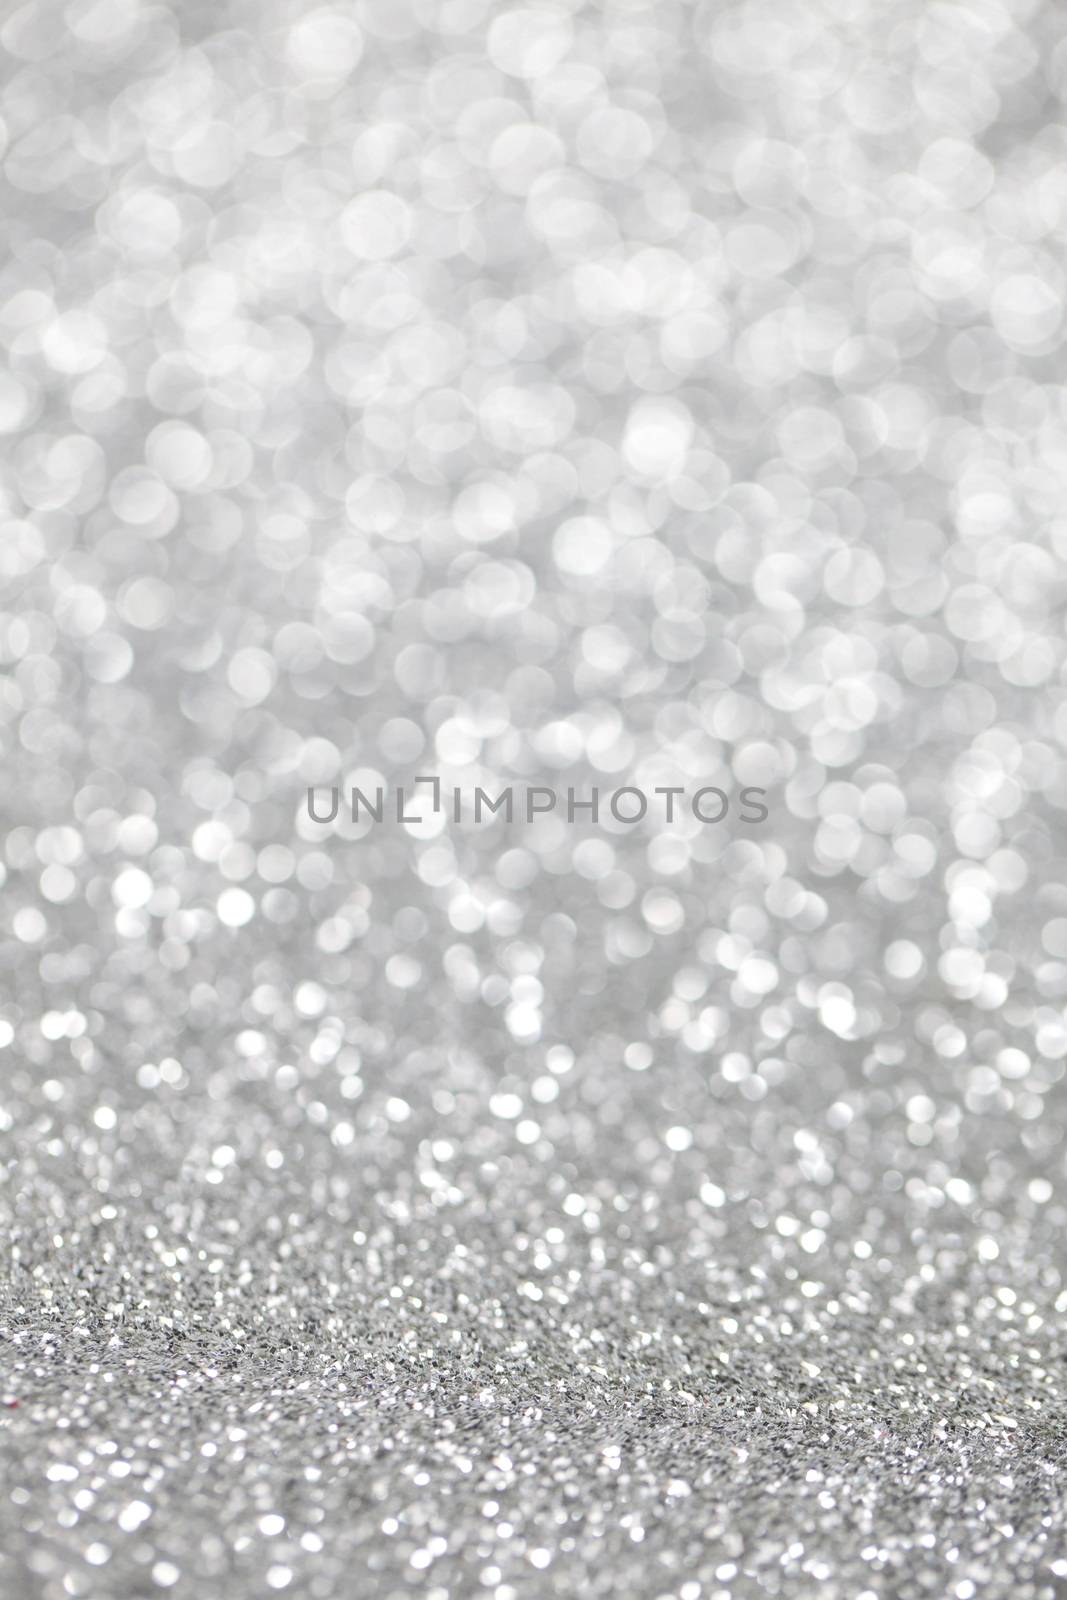 Abstract silver glitter background by Yellowj